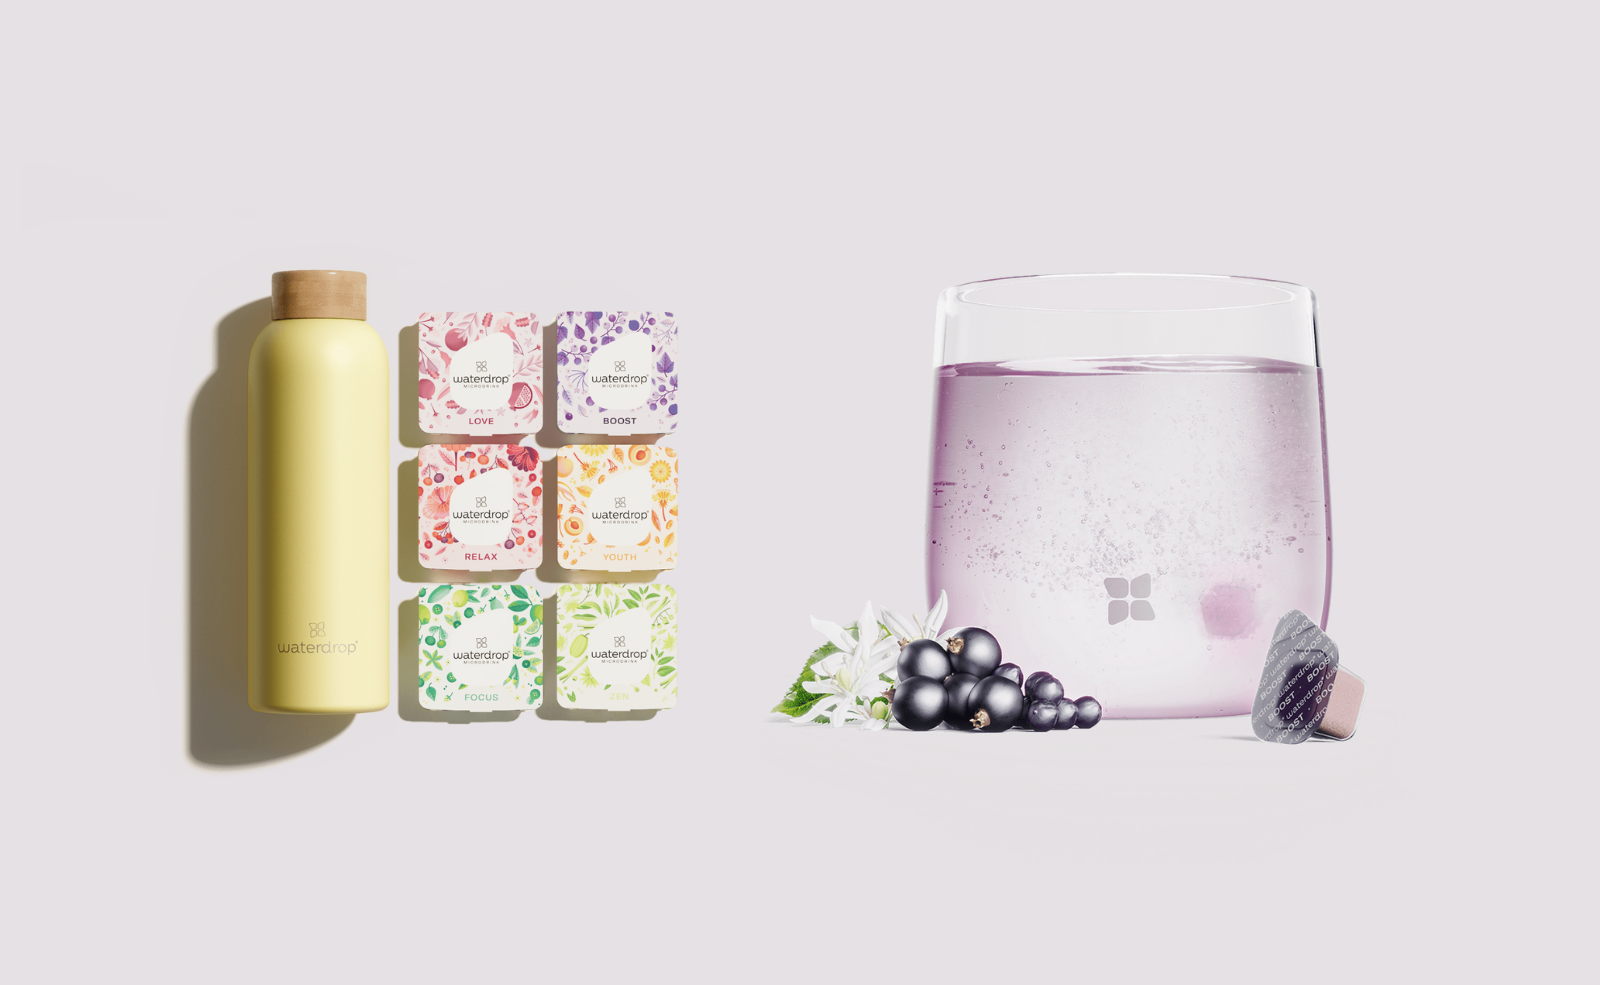 Waterdrop introduces microdrinks and customizable water bottles